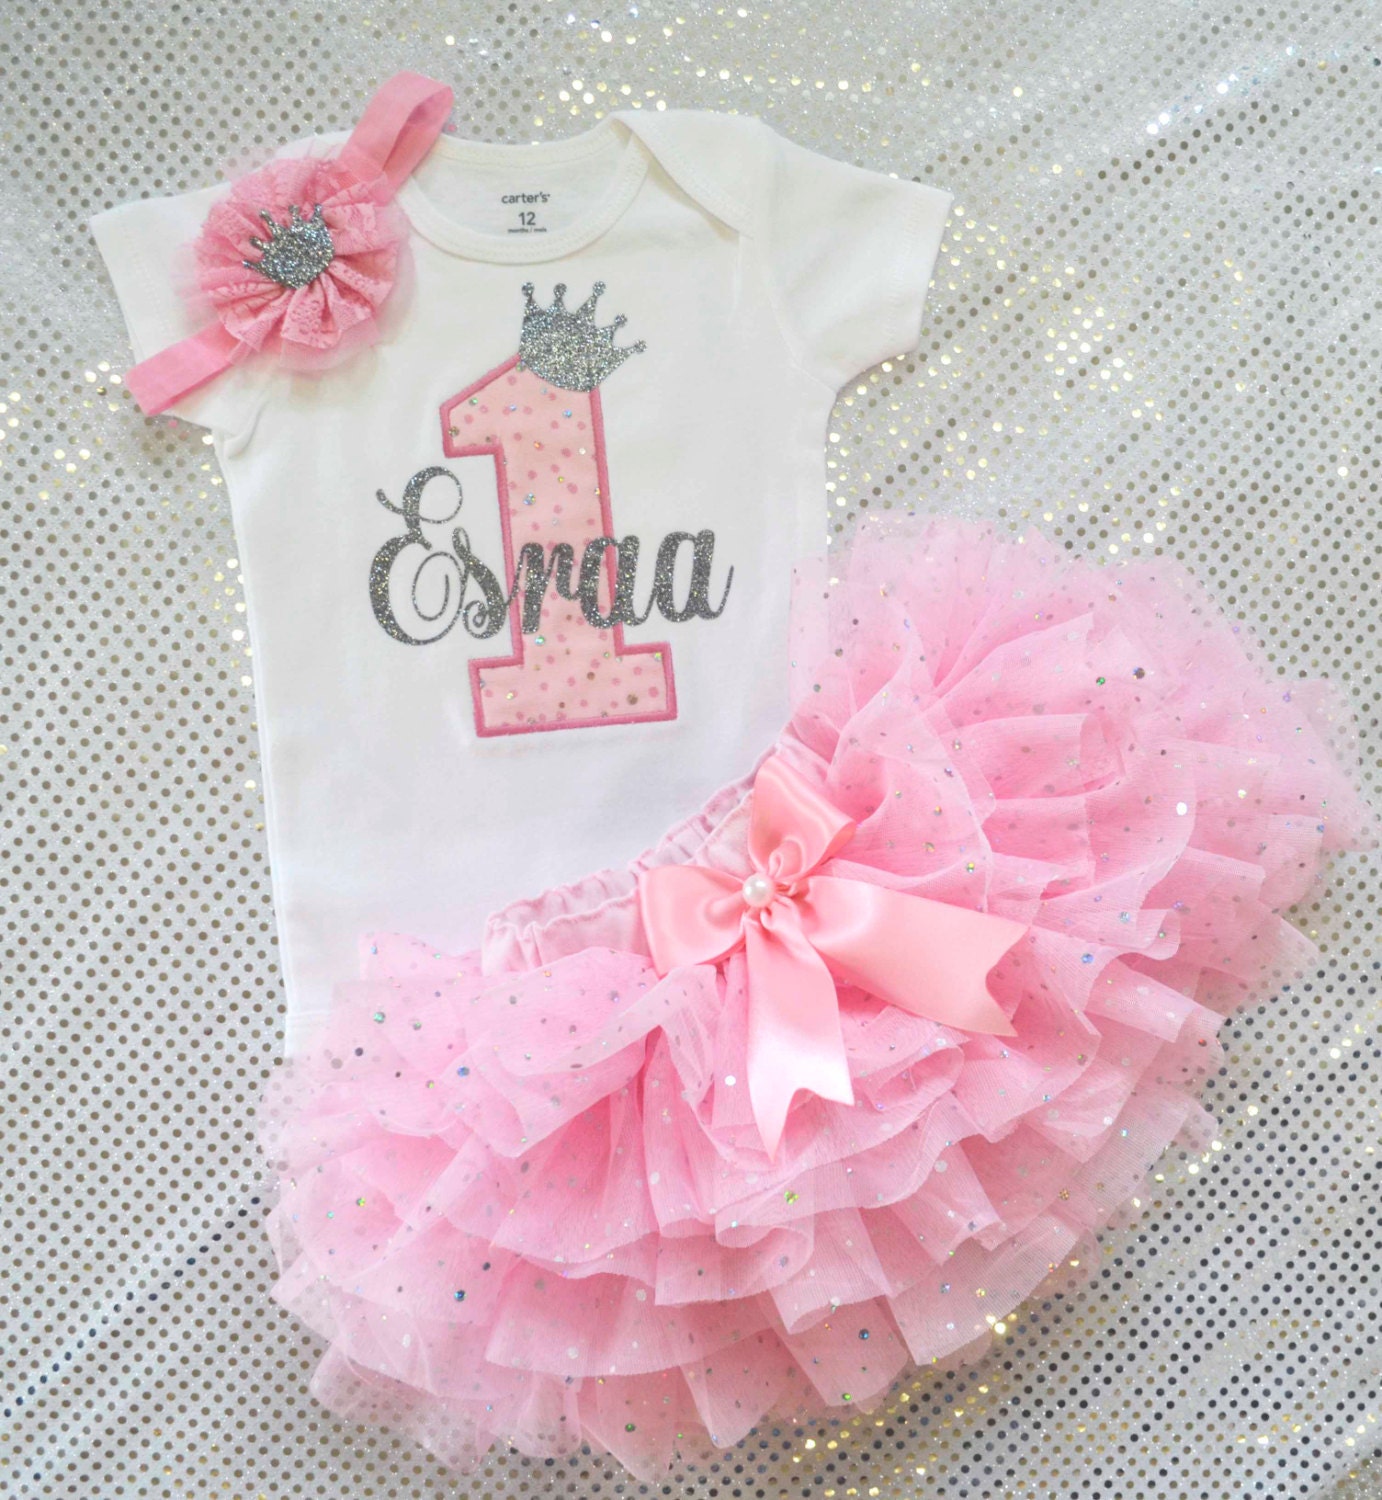 one year old baby girl outfit